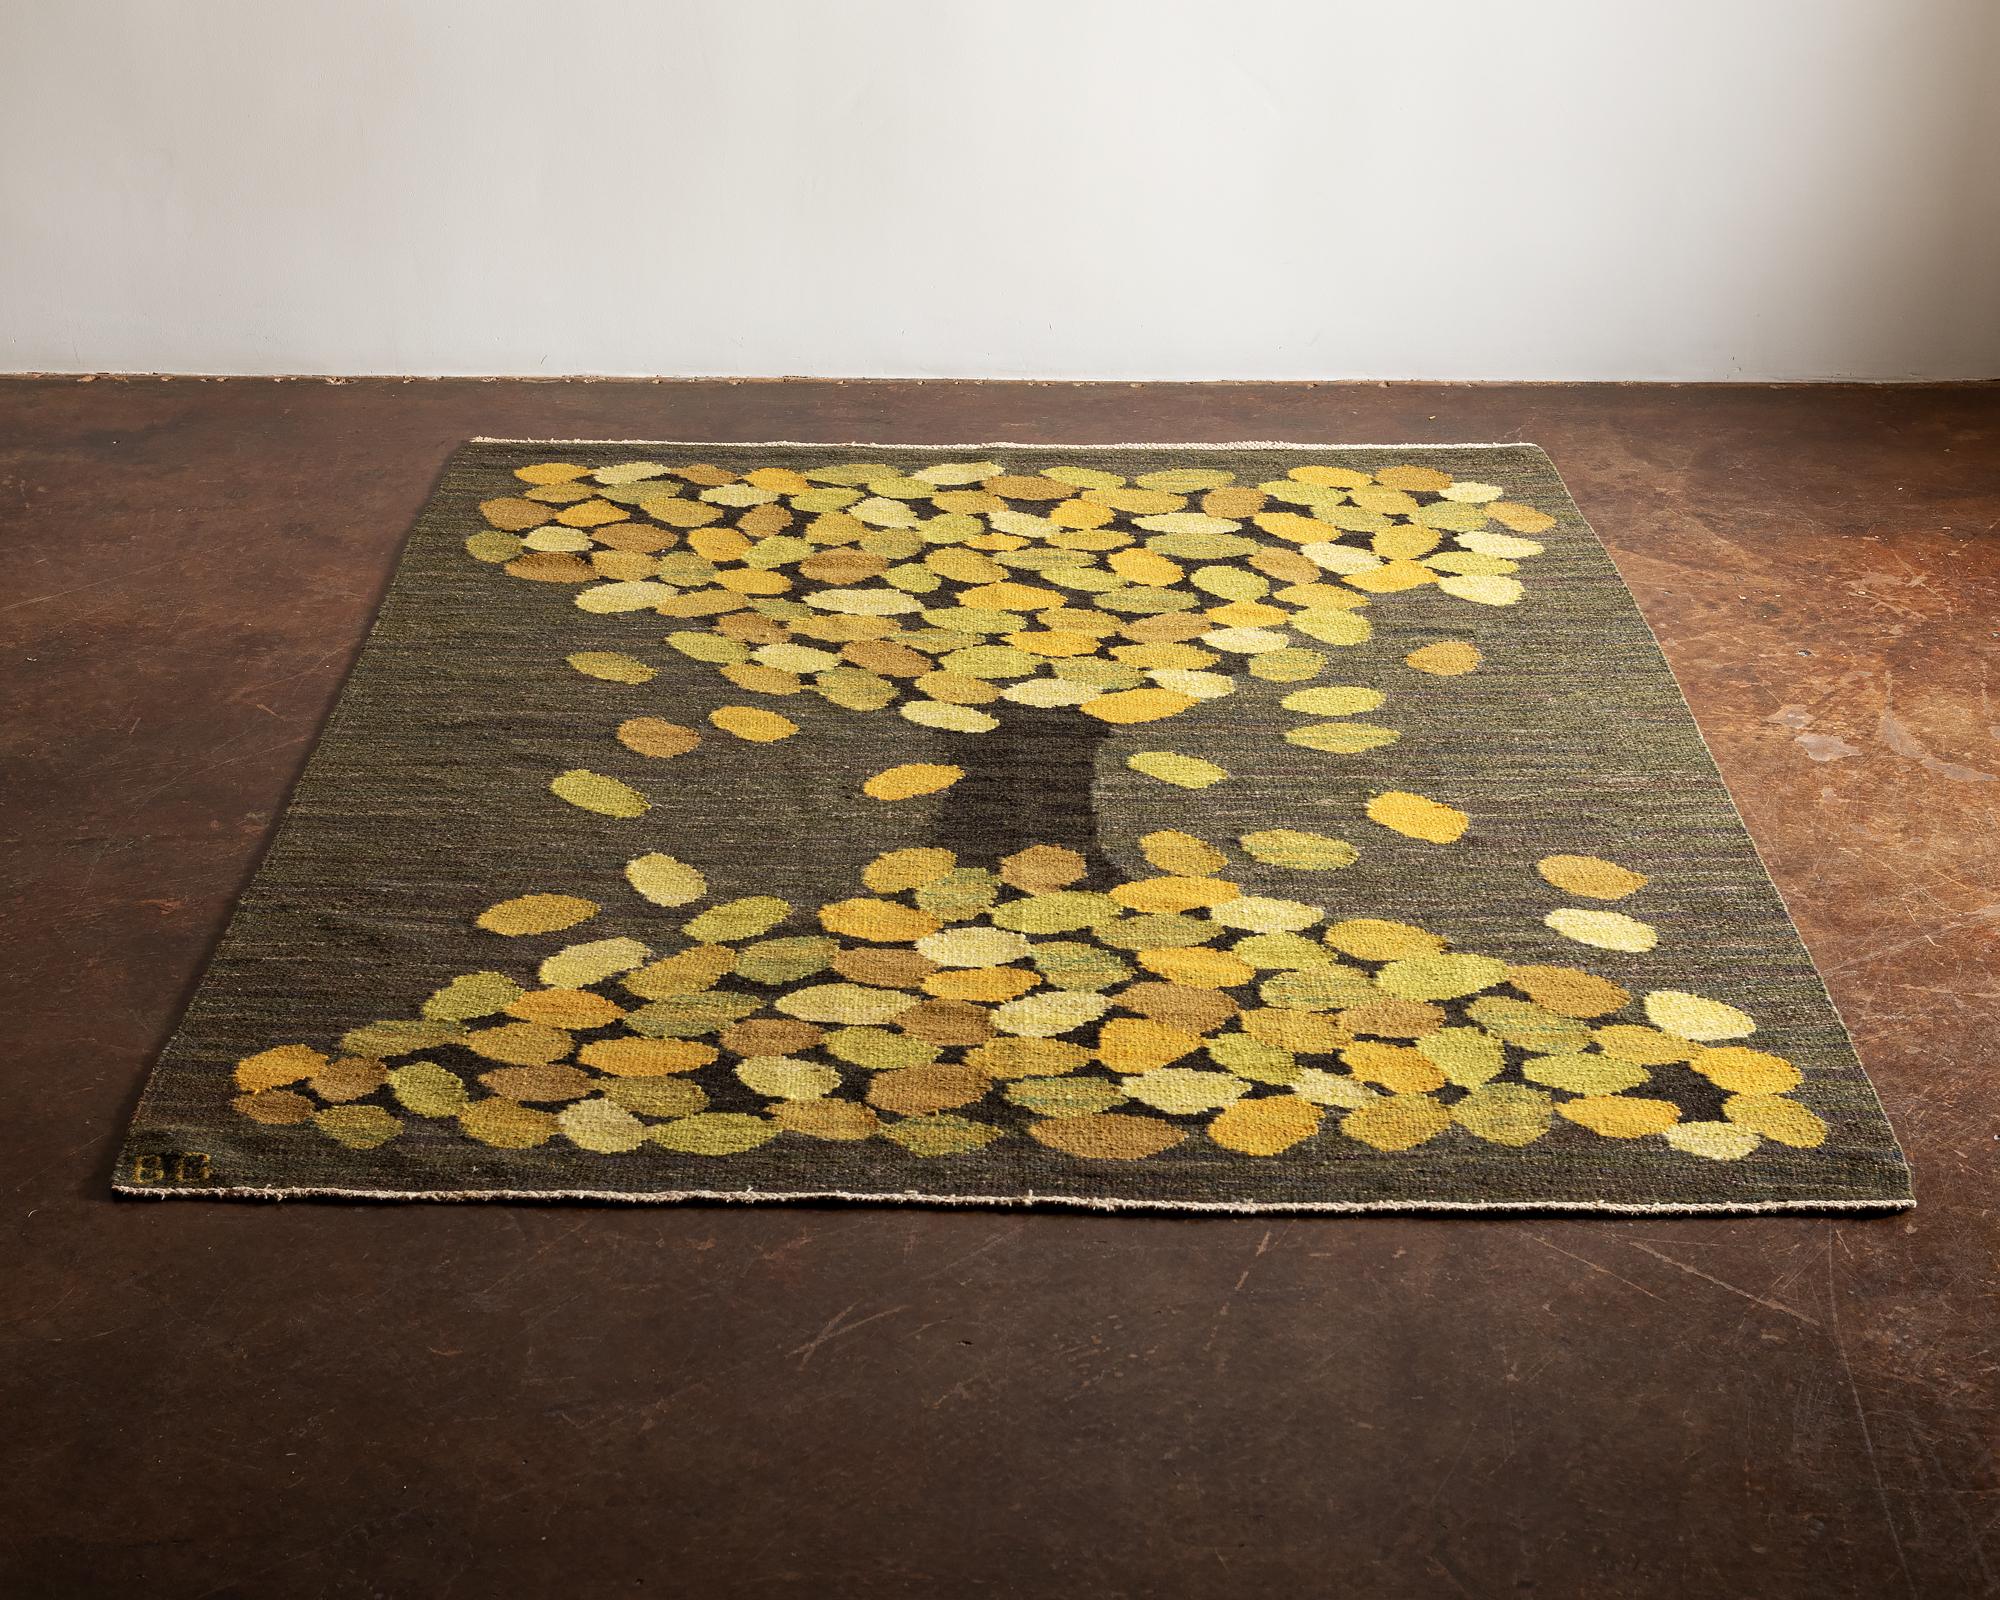 A stunning handwoven wool flatweave rug or tapestry by Brita Grahn depicting a deciduous tree in fall. Executed in vibrant shades of green, yellow and brown on a greenish grey background. Signed BG, Sweden, 1960s.

Brita Grahn, Swedish textile